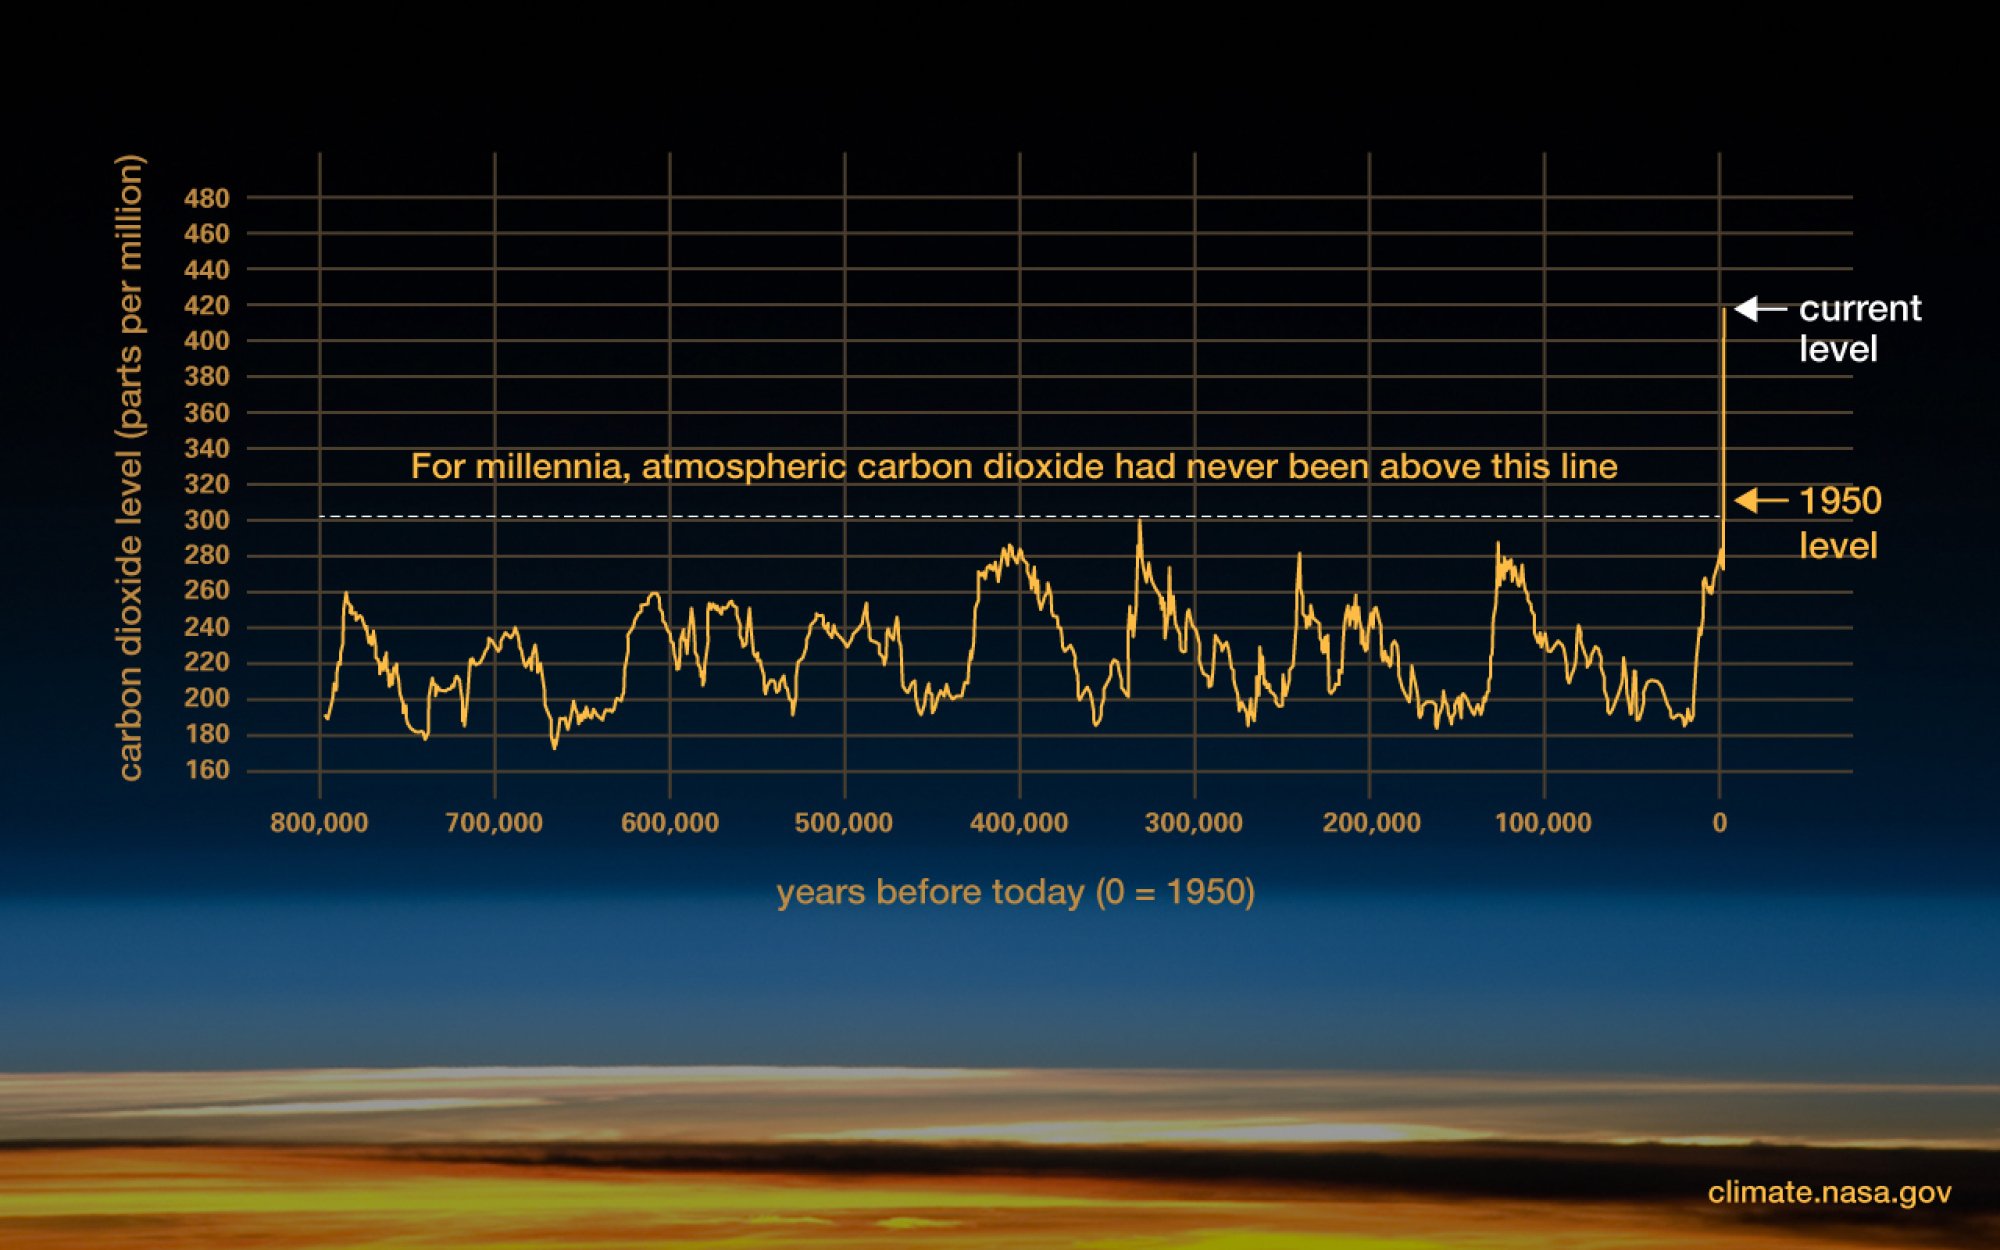 Atmospheric carbon dioxide levels have skyrocketed over the past century.